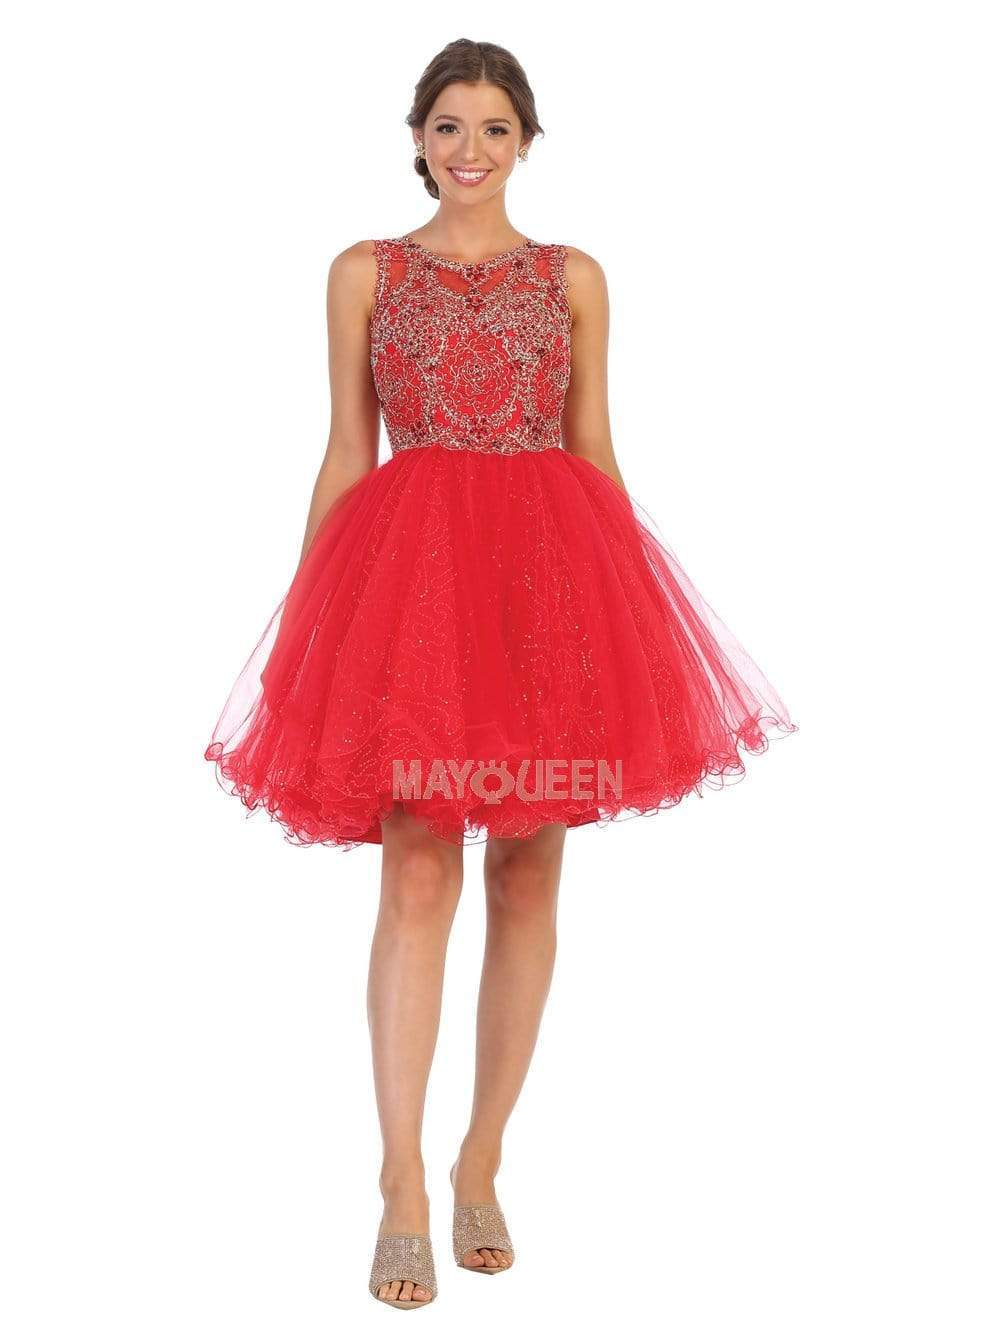 May Queen - MQ1726 Rosette Appliqued Glitter Tulle Dress Cocktail Dresses 4 / Red